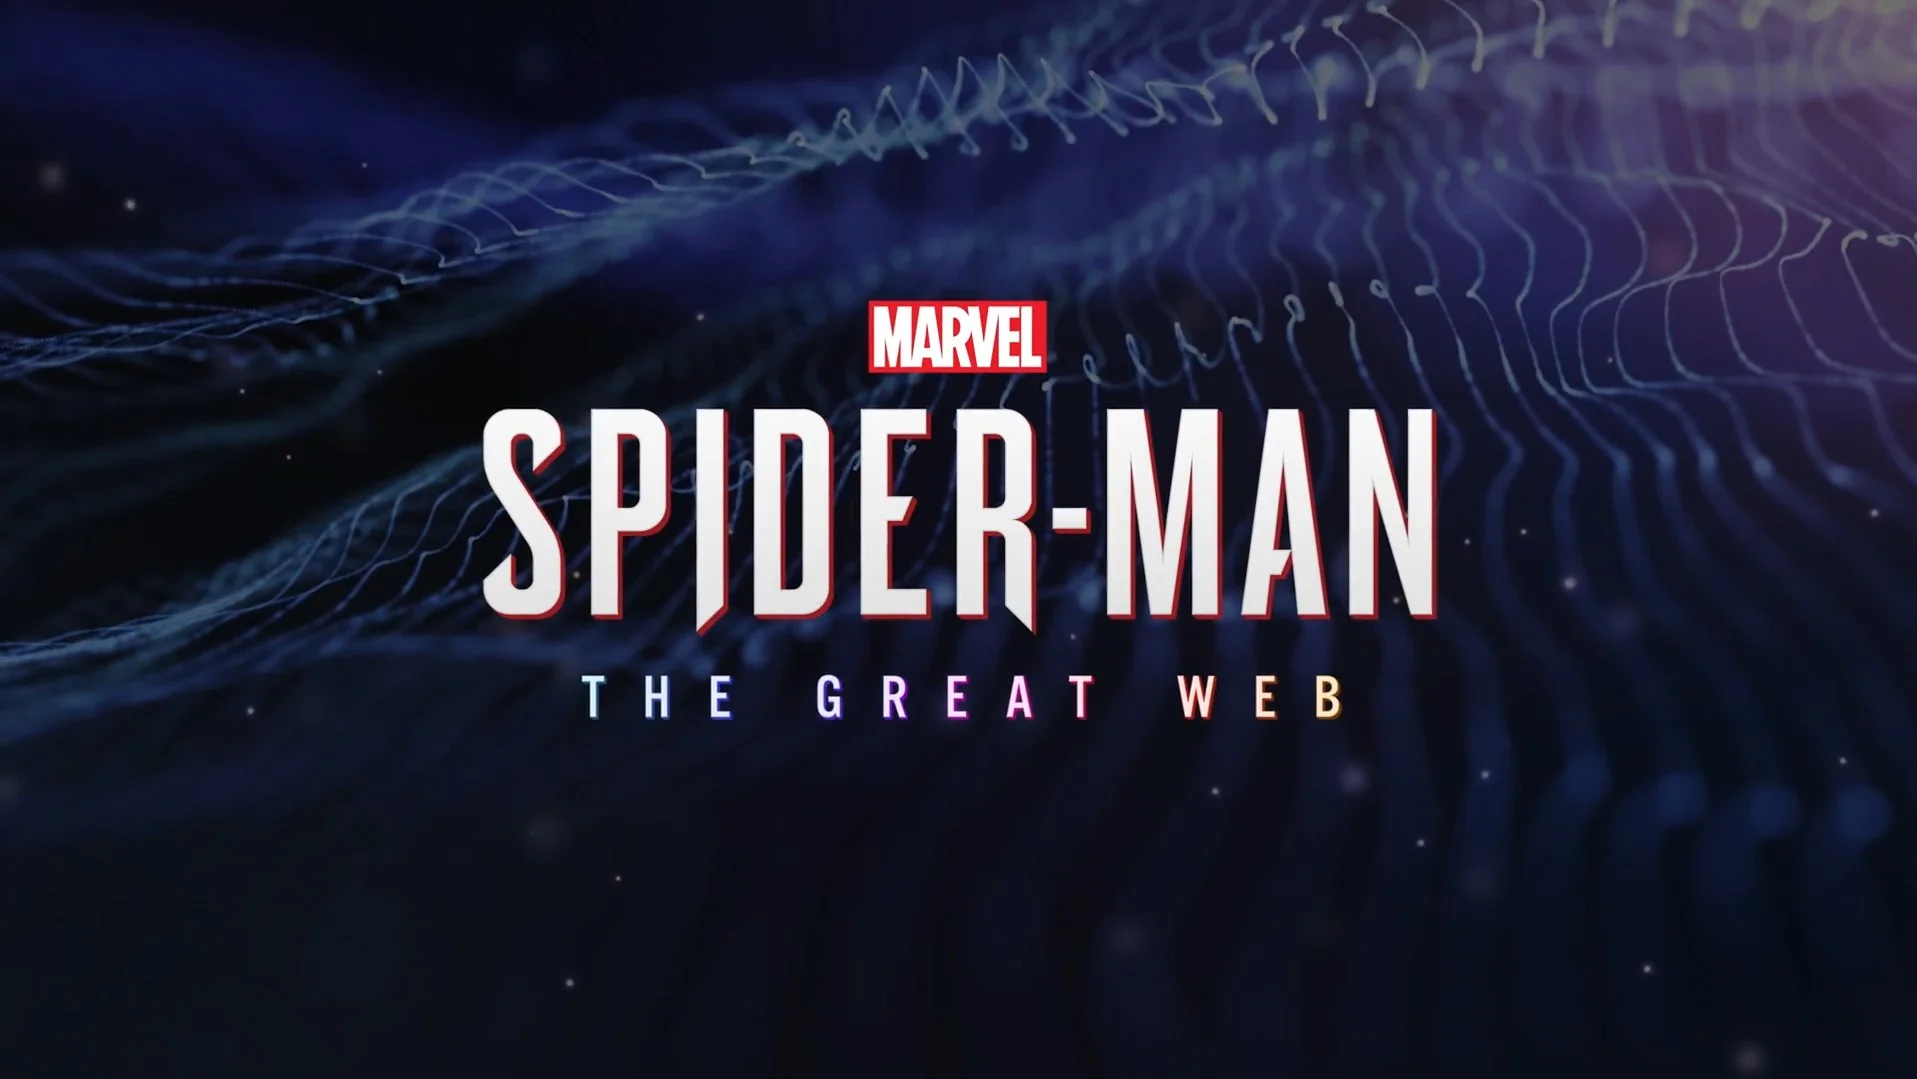 The second trailer for the canceled Spider-Man: The Great Web from Insomniac Games has leaked online.